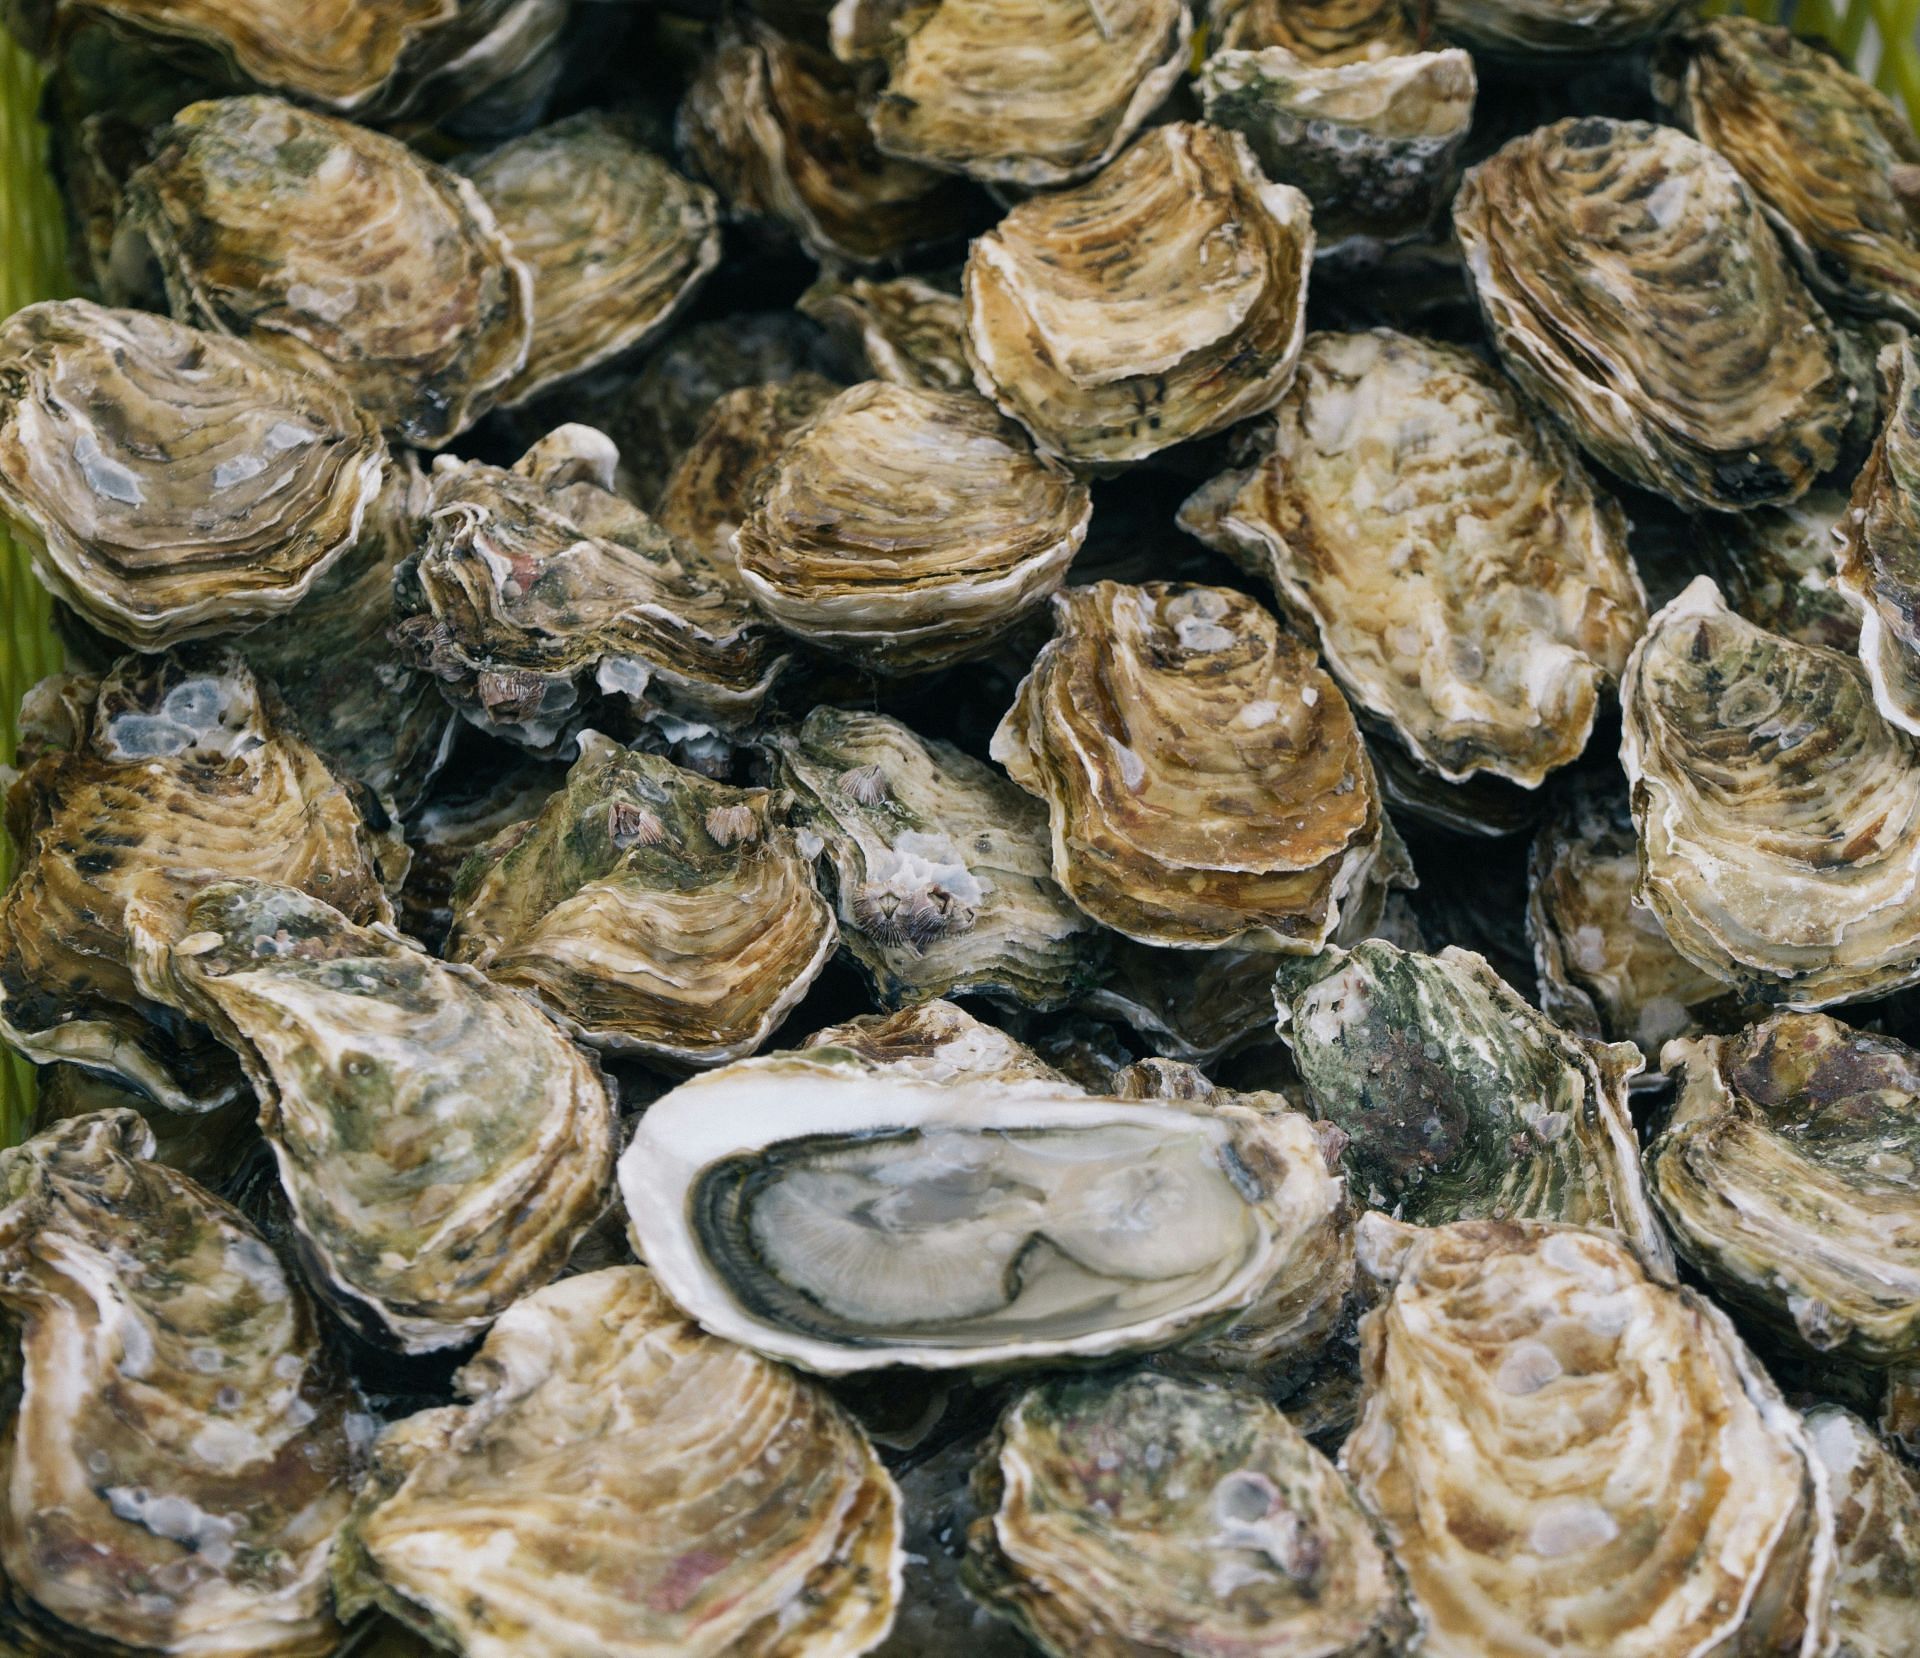 Oysters too come under collagen-rich foods (Image by Ben Stern/Unsplash)